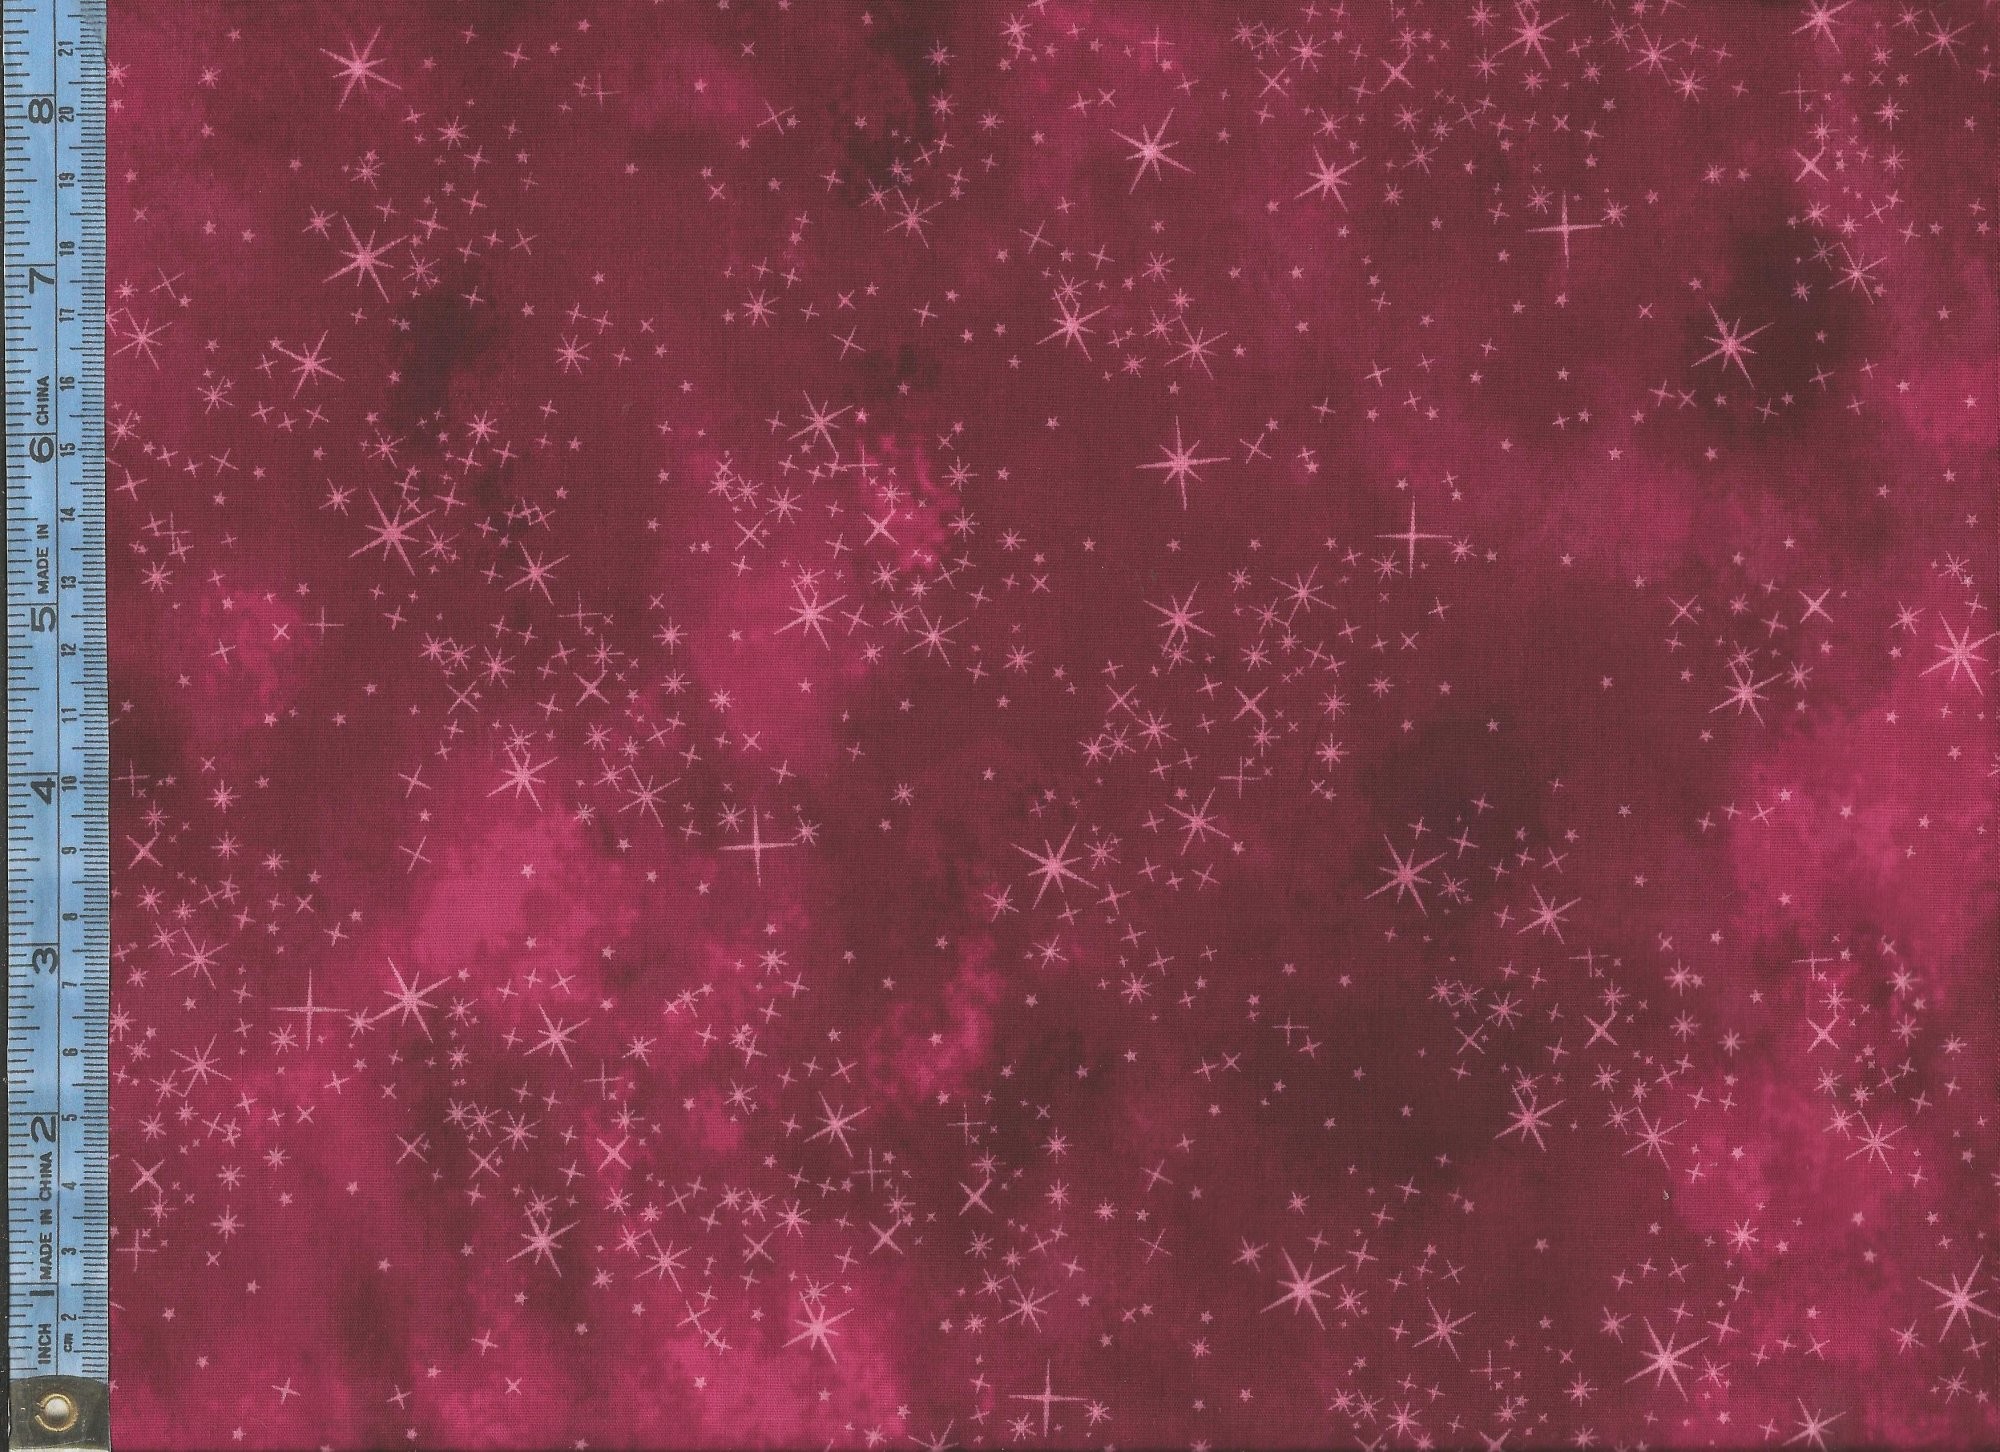 2000x1452 Sugar Plum - stars on mottled rose red and bright pink background